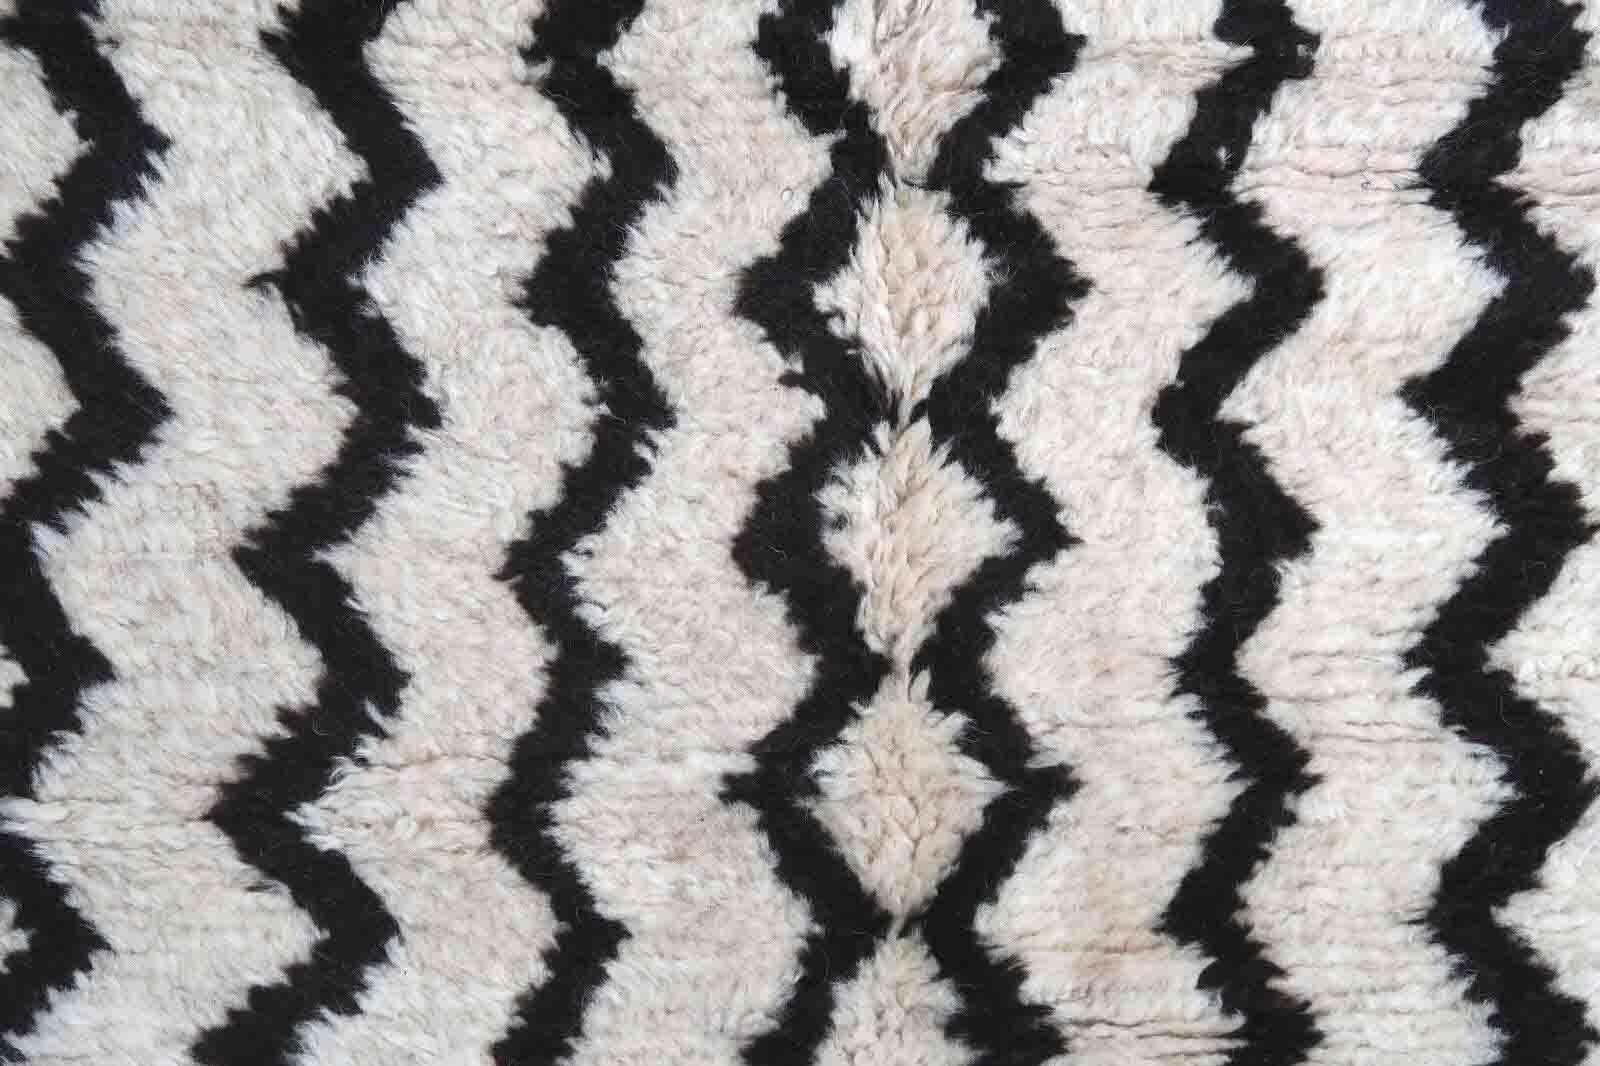 Handmade antique Moroccan Berber rug in geometric design. Ait Ouaouzguit tribe rug from Ourzazate region in the High Atlas, Morocco. The rug is from the middle of 20th century in original good condition.

-condition: original good,

-circa: